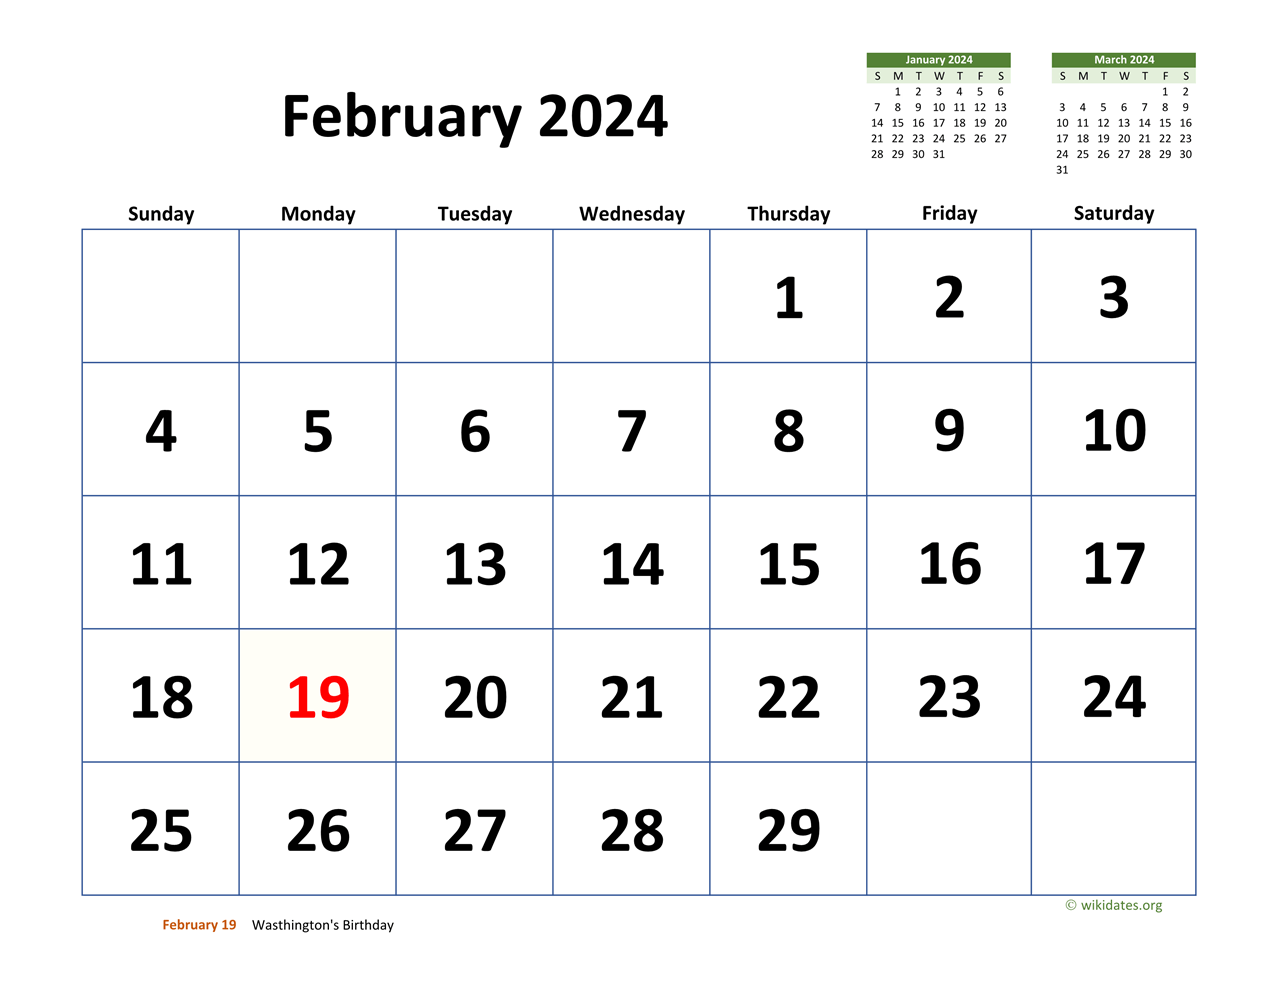 February 2024 Calendar with Extra-large Dates | WikiDates.org